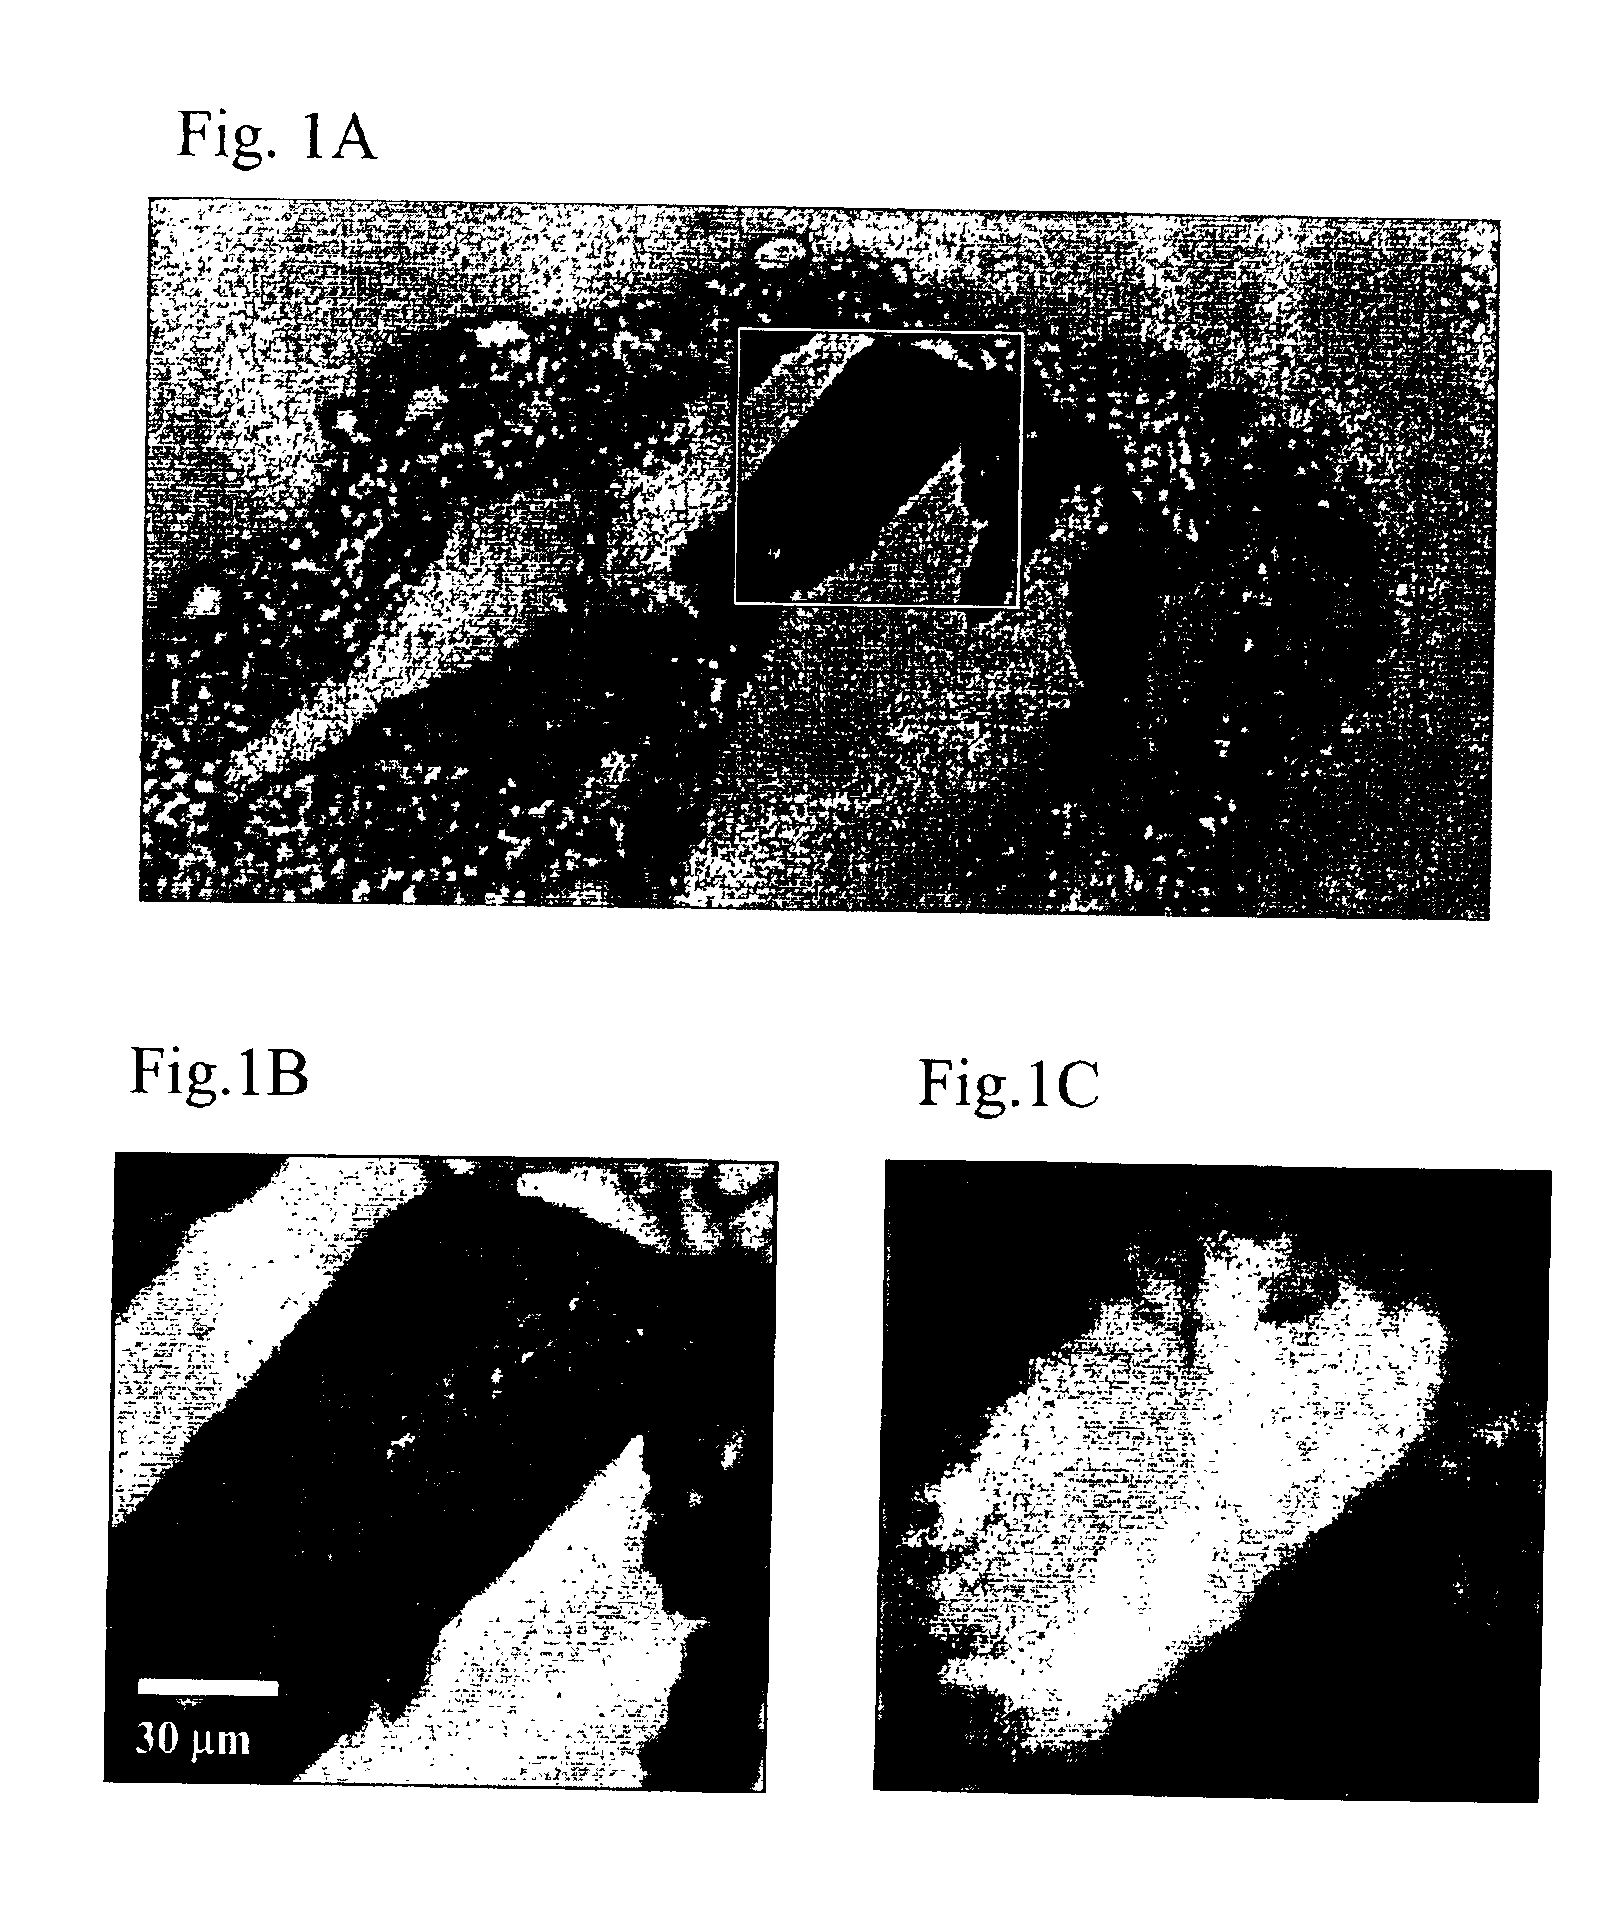 Method for Raman chemical imaging and characterization of calcification in tissue